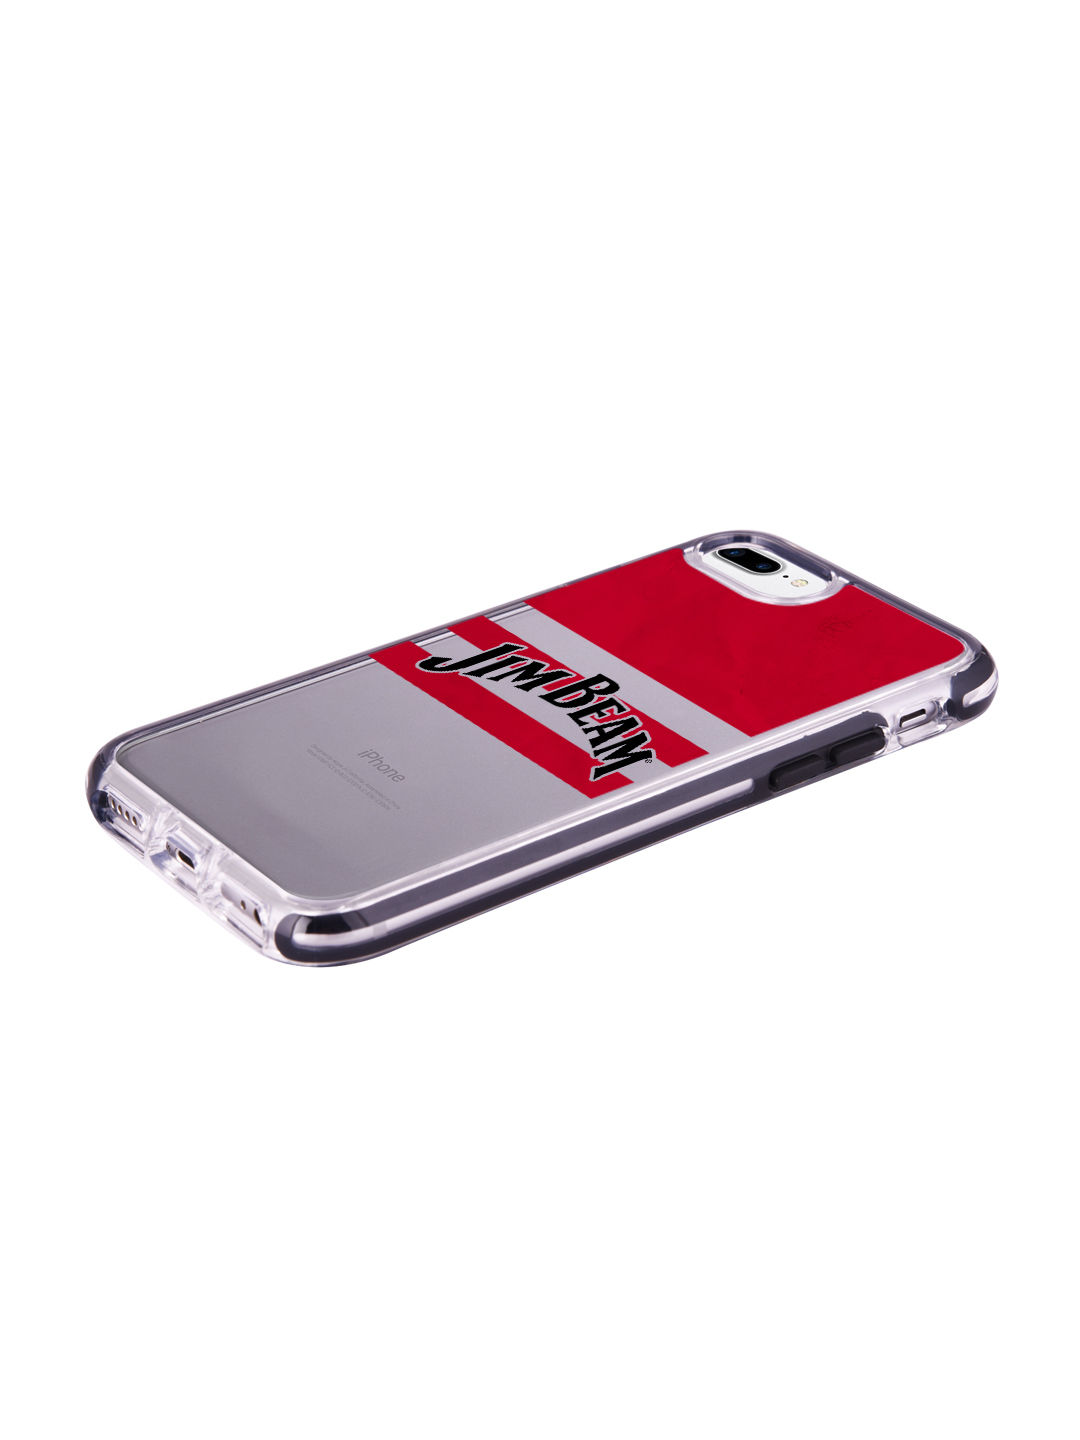 Jim Beam Red Stripes - Shield Case for iPhone 7 Plus